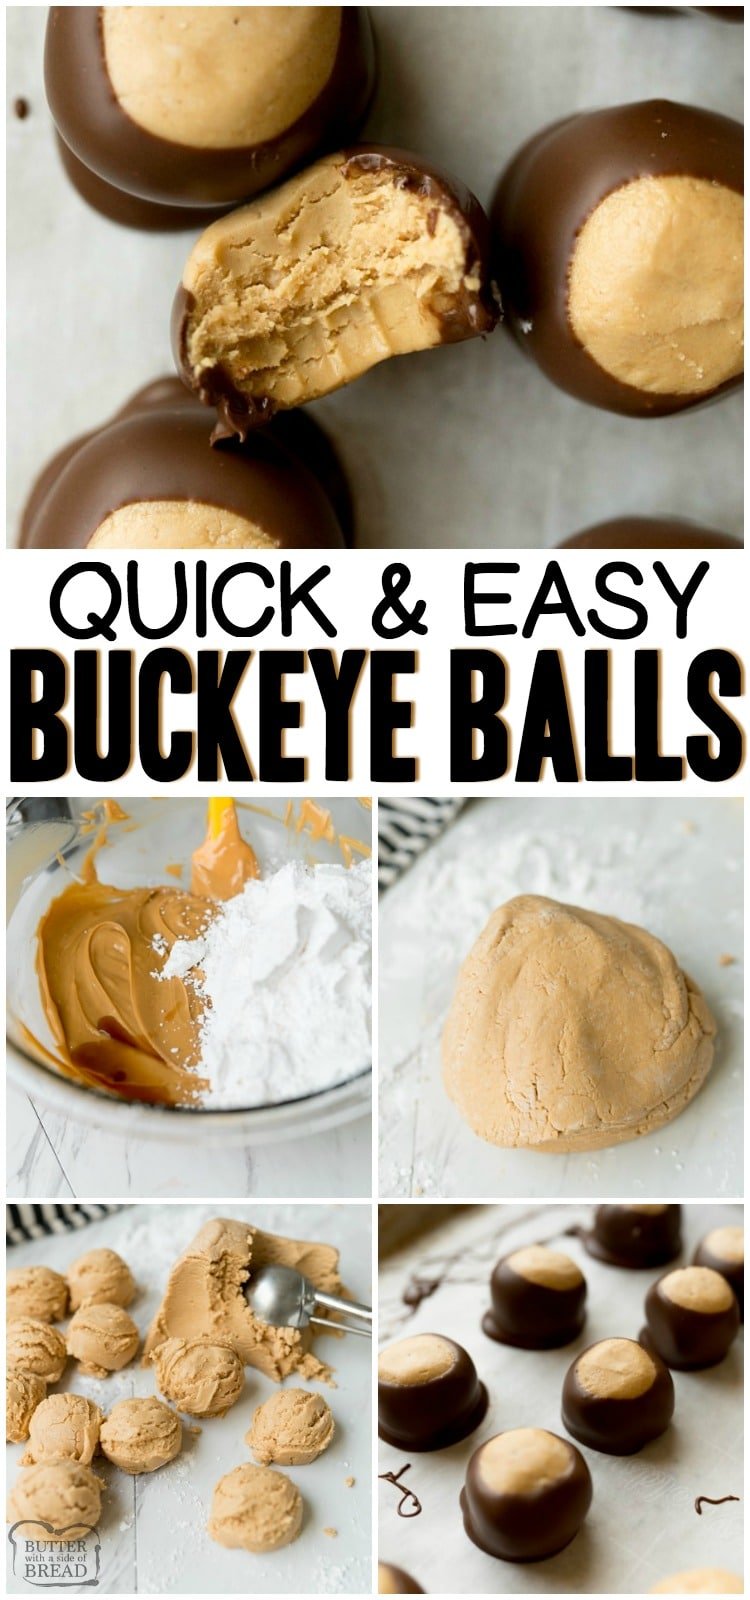 Buckeye Balls are simple, peanut butter and chocolate no bake candies. Buckeye candy is super easy to make and no one can resist these easy homemade candies! #buckeye #candy #chocolate #peanutbutter #dessert #recipe from BUTTER WITH A SIDE OF BREAD